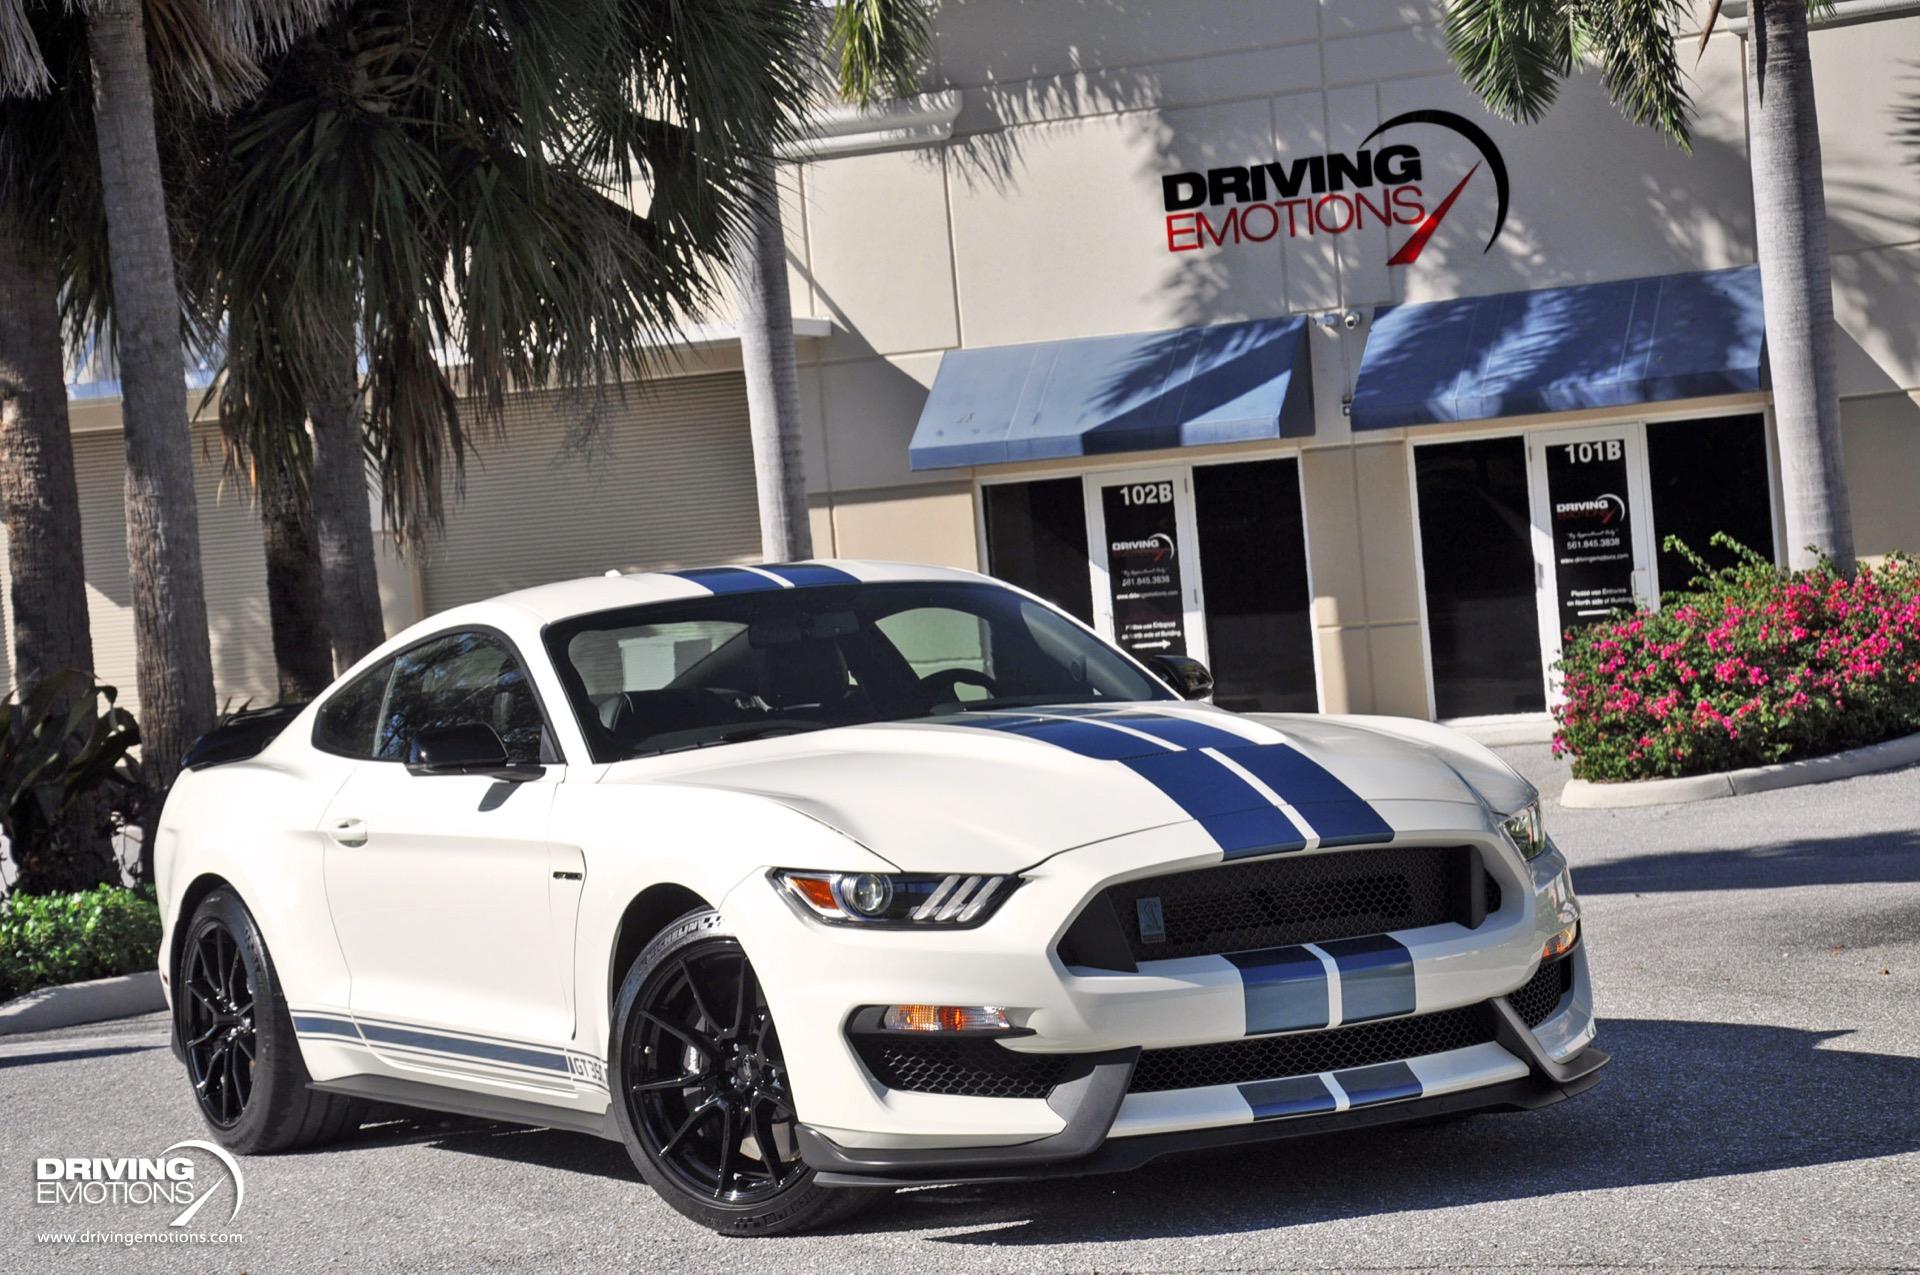 Used 2020 Ford Mustang Shelby GT350 Heritage Edition Shelby GT350 HERITAGE EDITION! LOW MILES! COLLECTOR! | Lake Park, FL